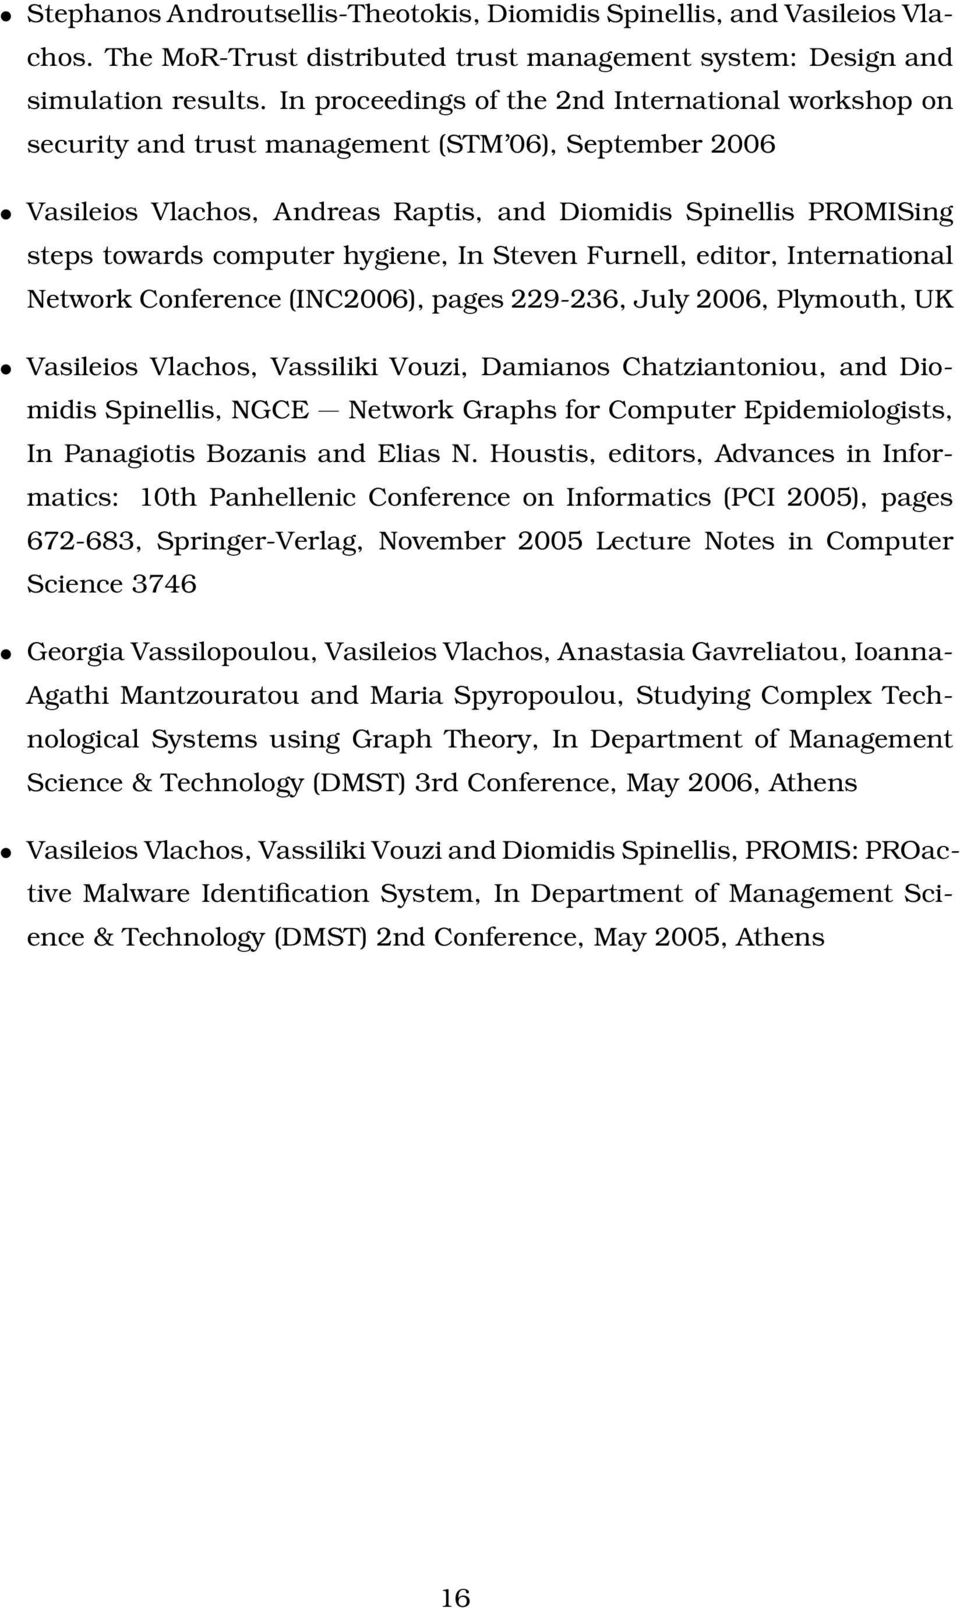 hygiene, In Steven Furnell, editor, International Network Conference (INC2006), pages 229-236, July 2006, Plymouth, UK Vasileios Vlachos, Vassiliki Vouzi, Damianos Chatziantoniou, and Diomidis